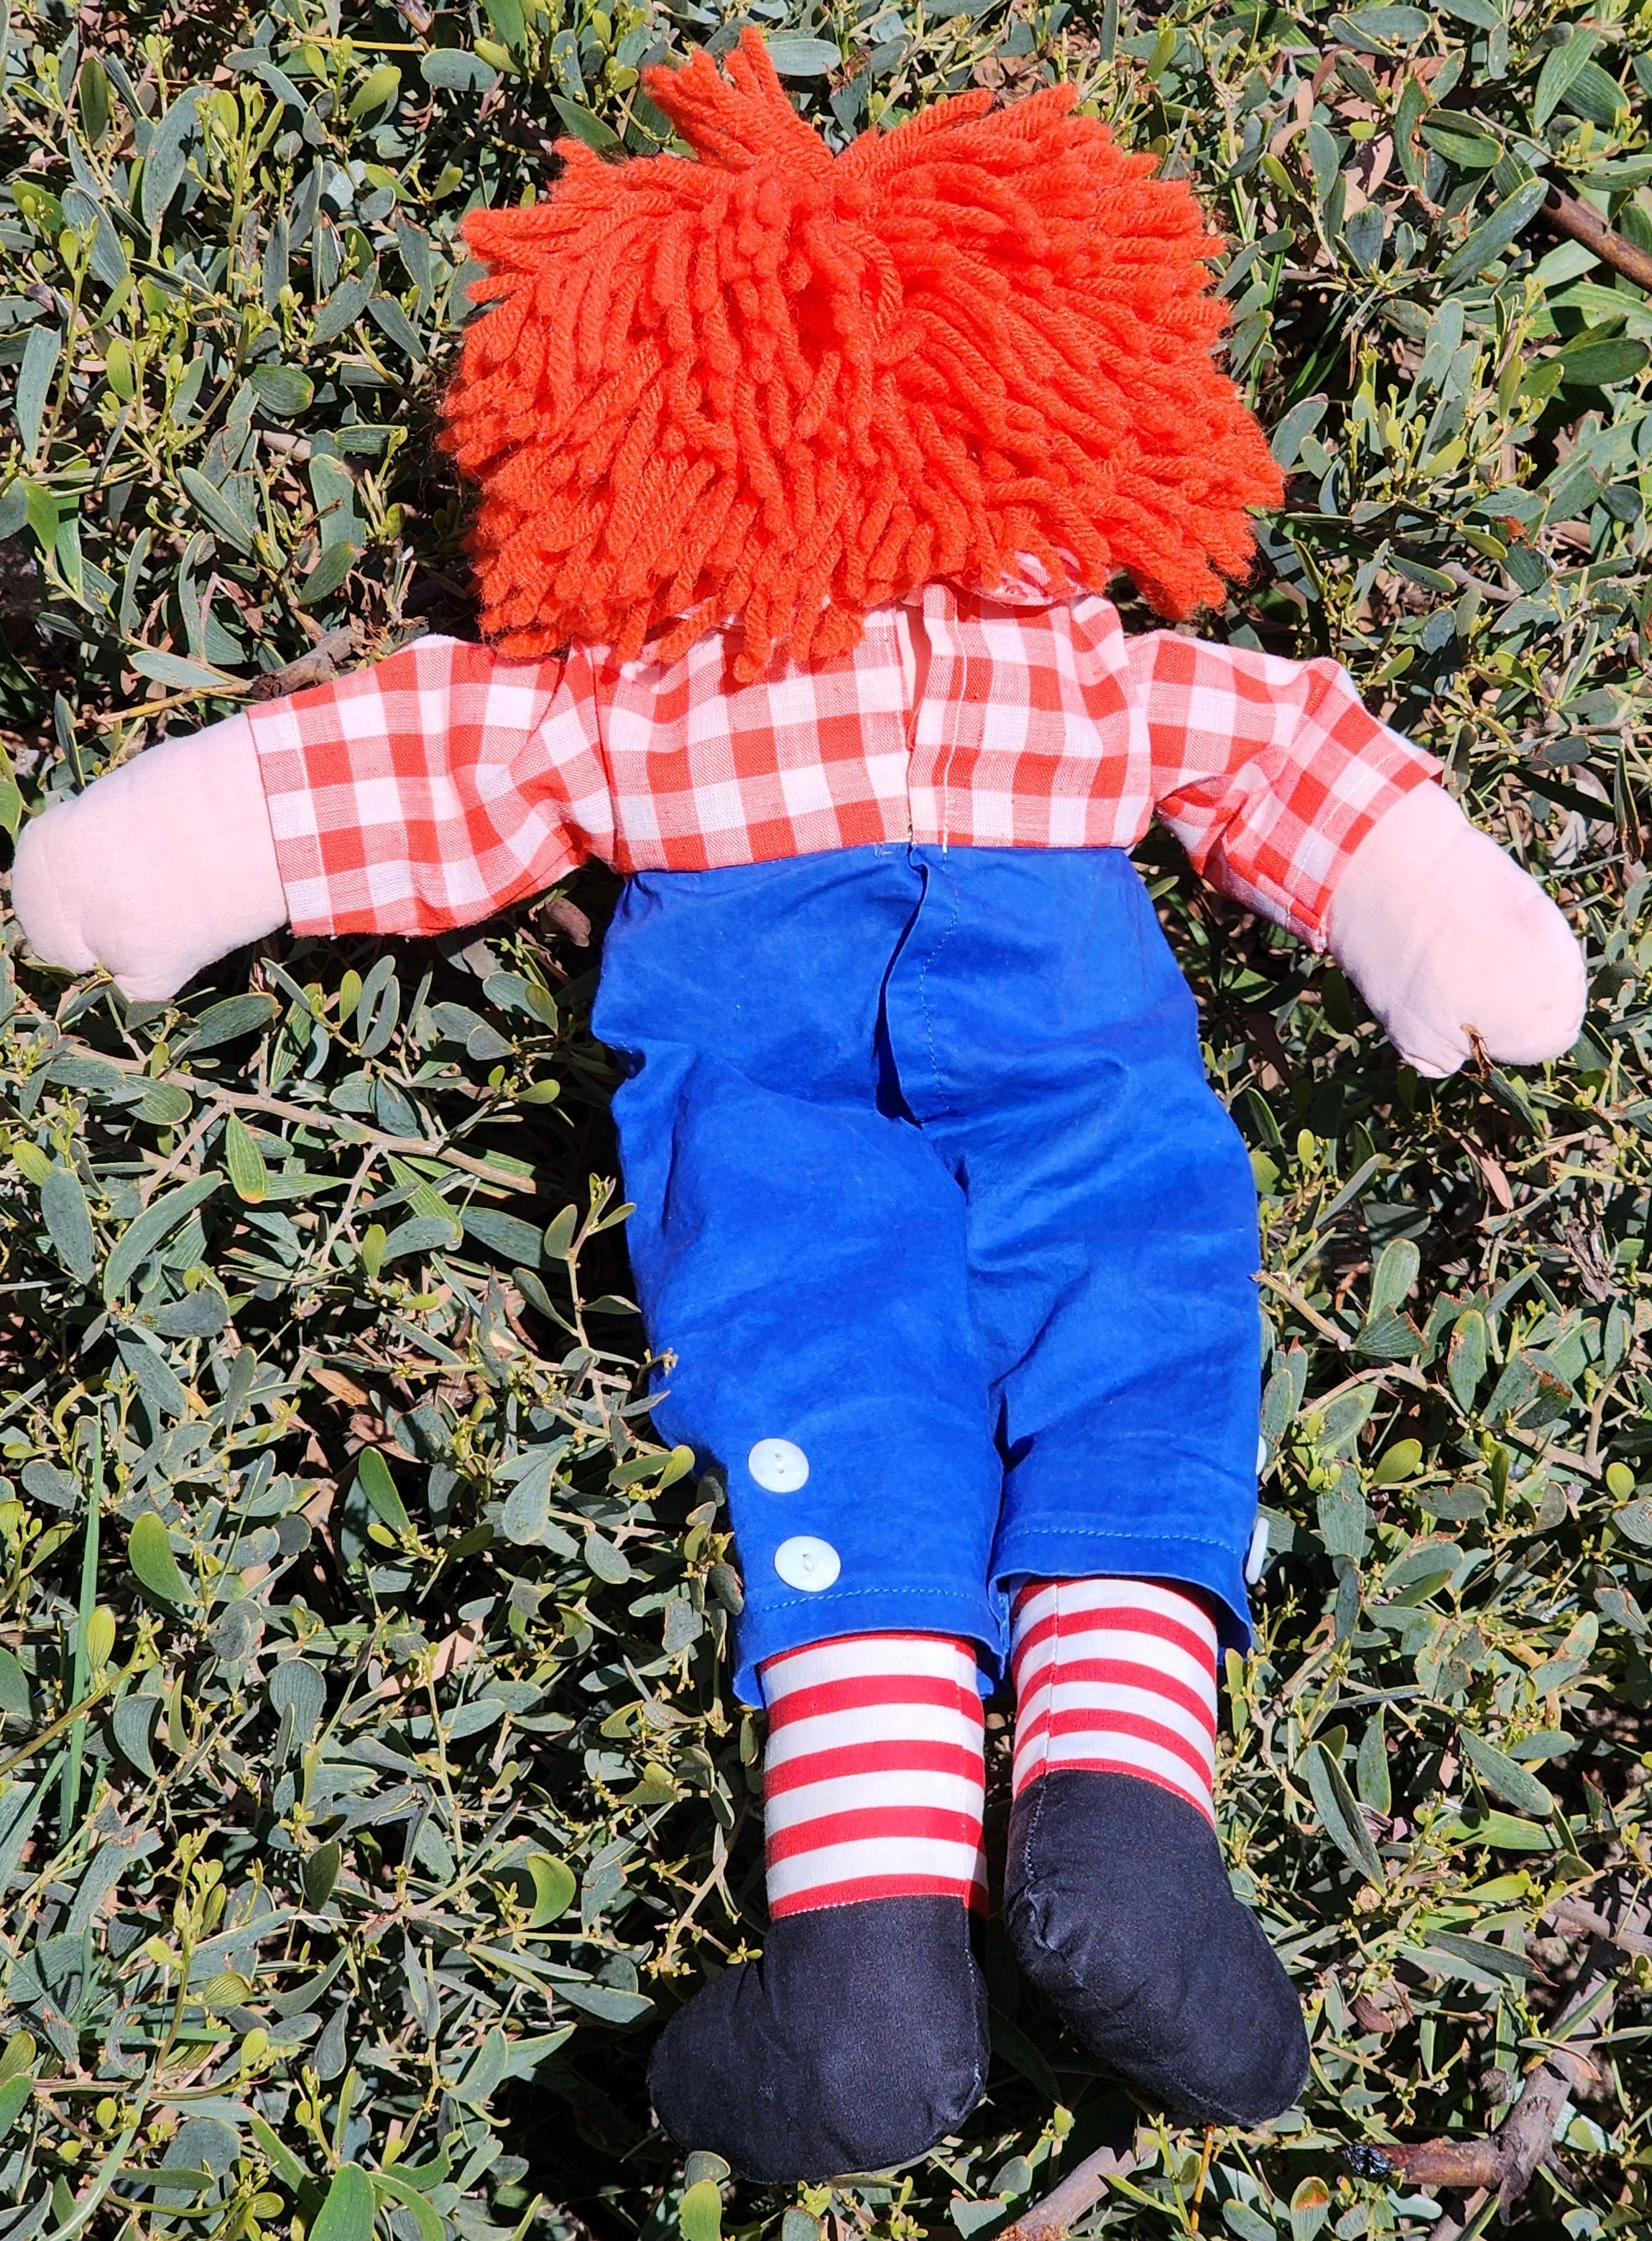 back of raggedy andy doll